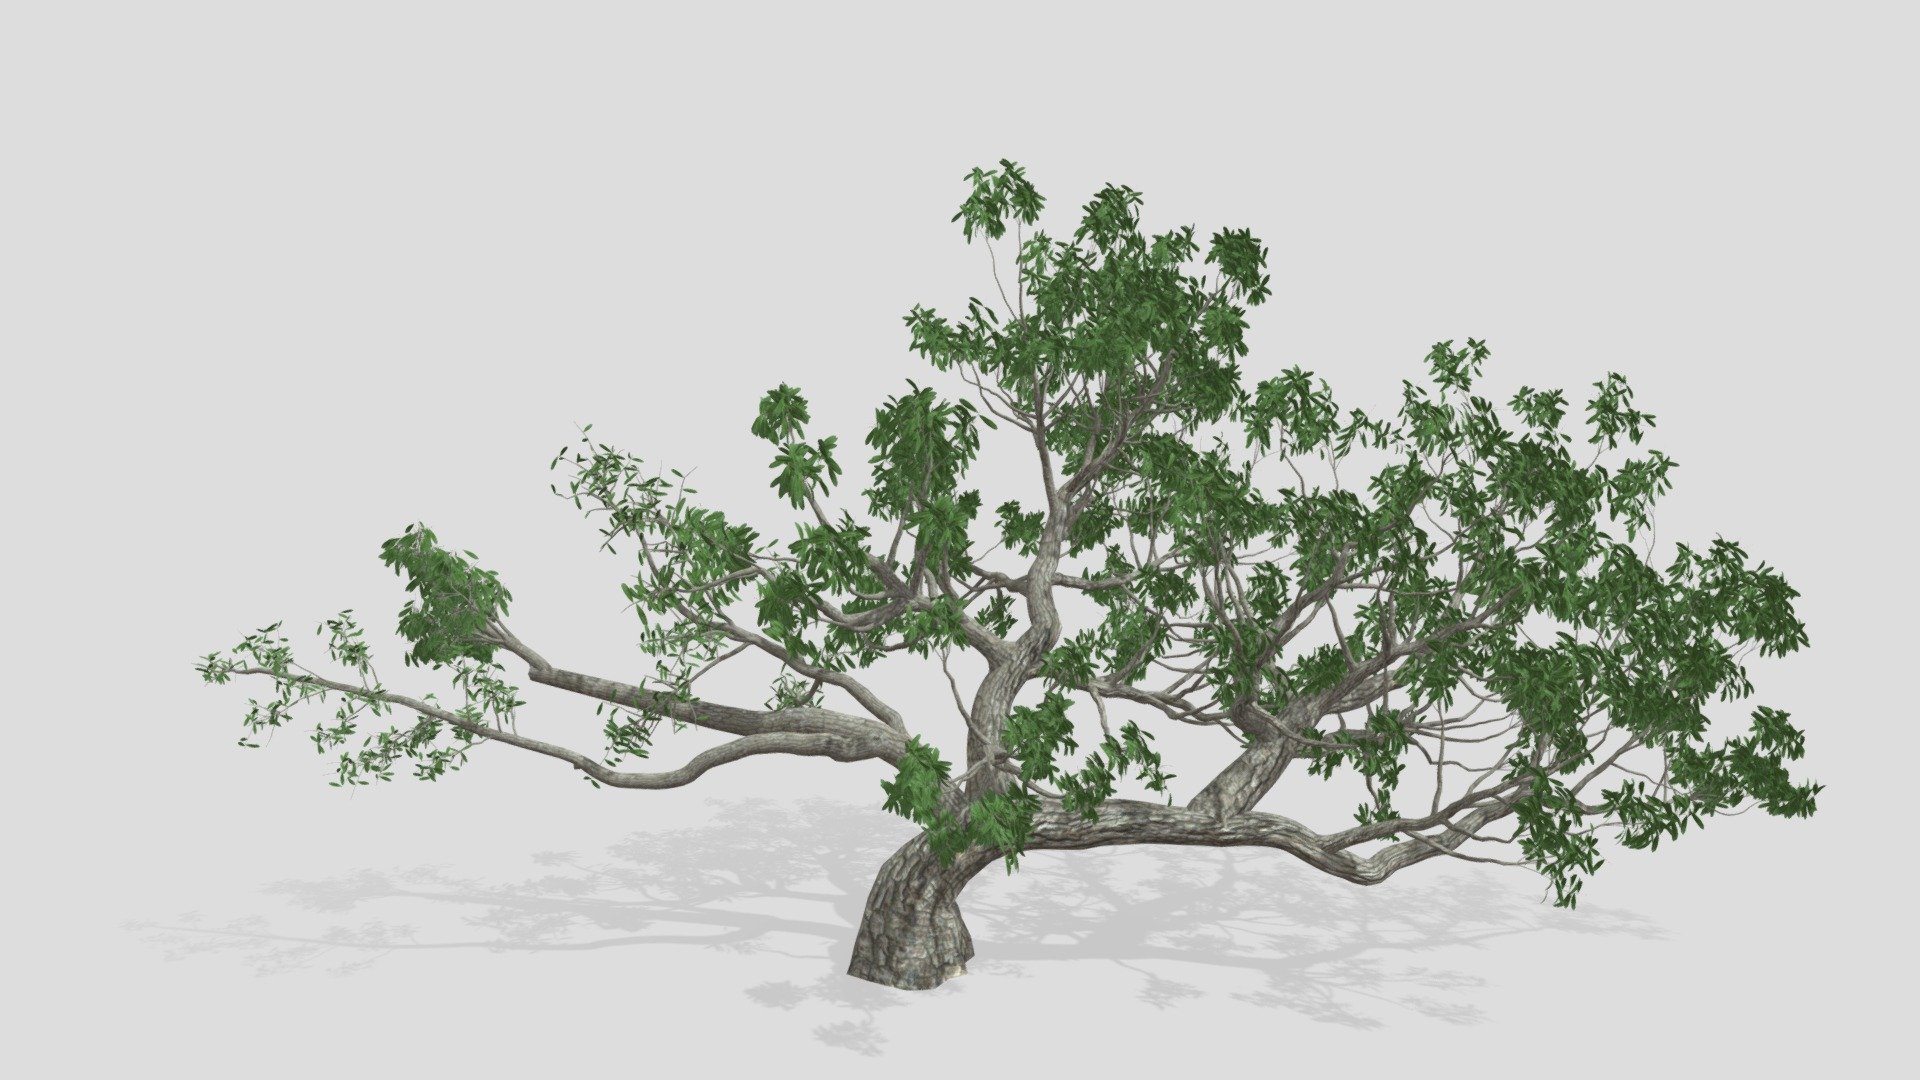 Quercus virginiana, also known as the Southern live oak, is an evergreen oak tree endemic to the Southeastern United States. Though many other species are loosely called live oak, the Southern live oak is particularly iconic of the Old South 3d model